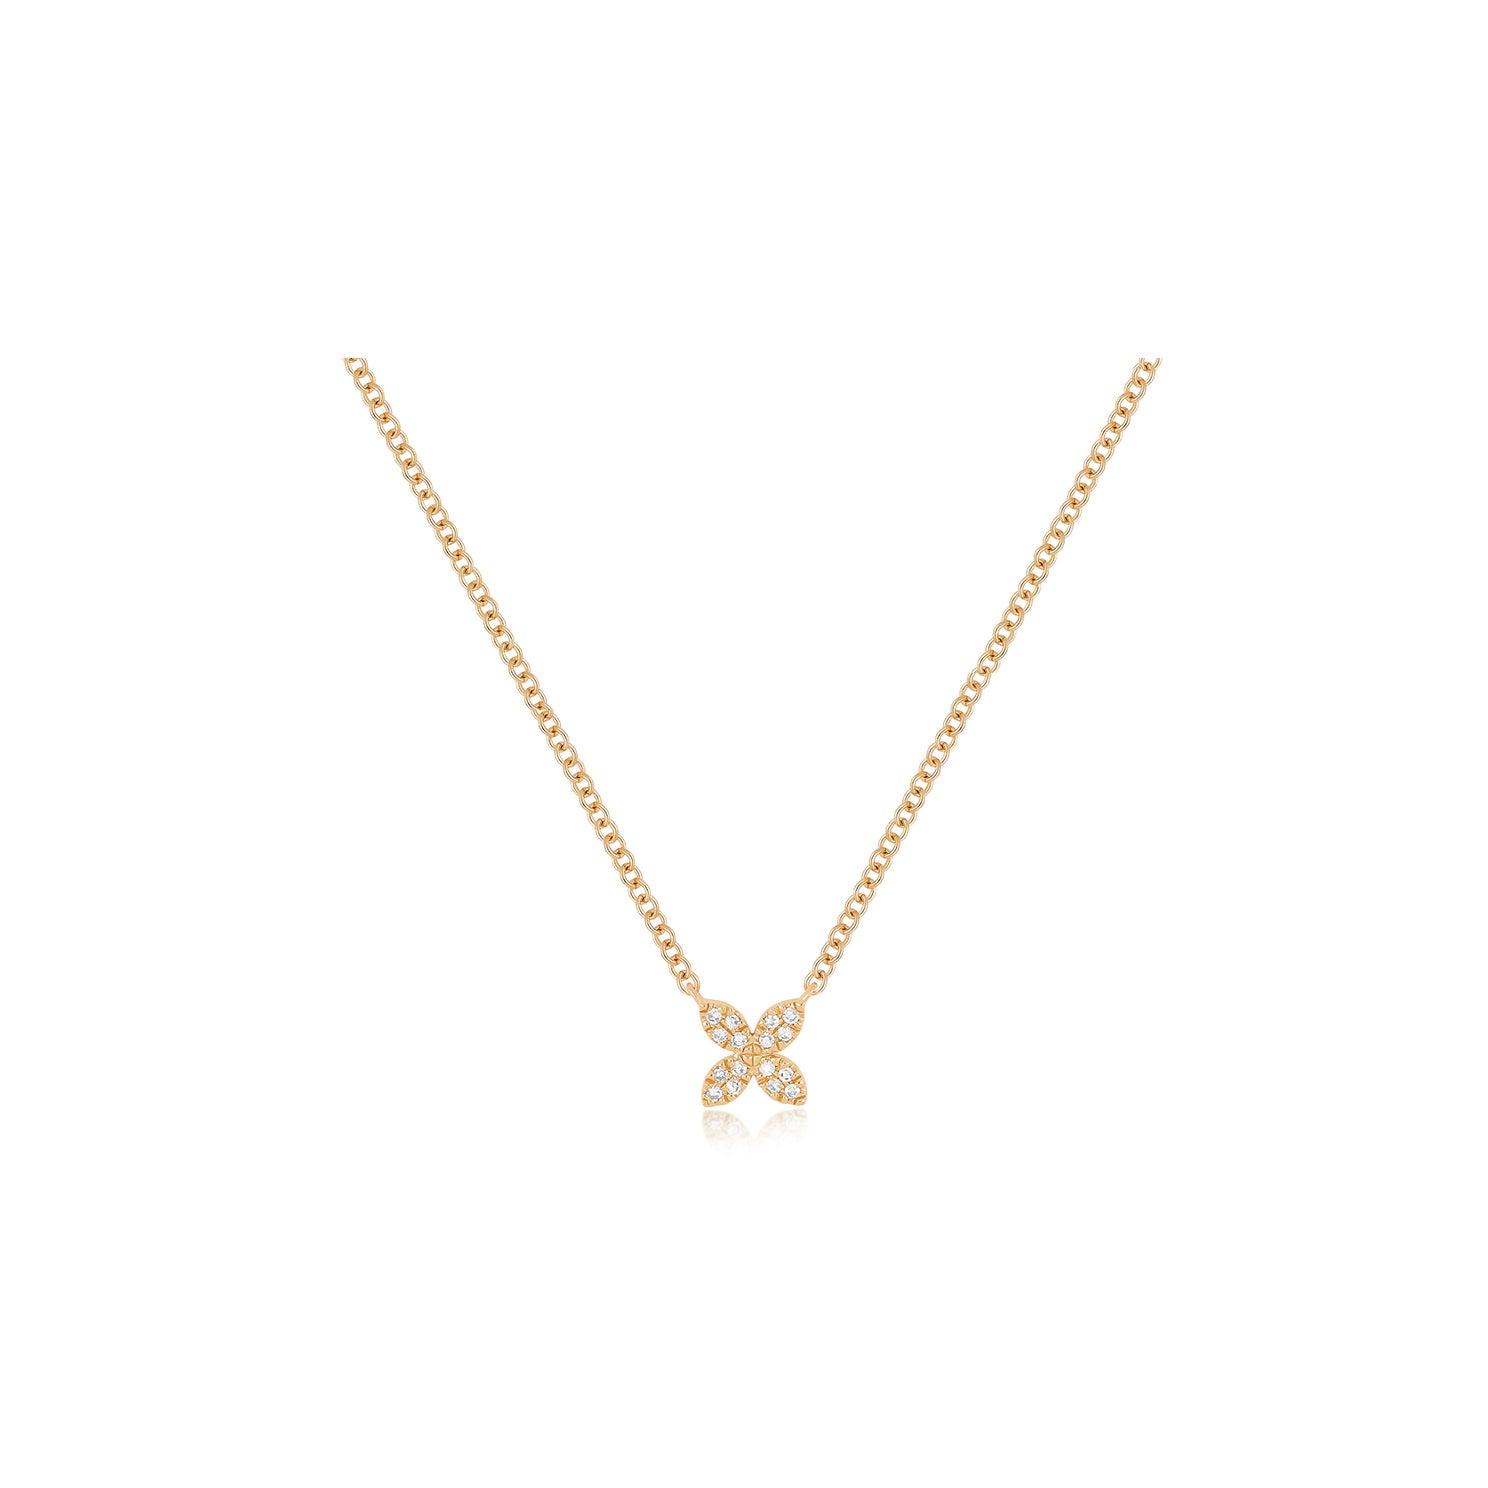 Diamond Blossom Necklace in 14k rose gold